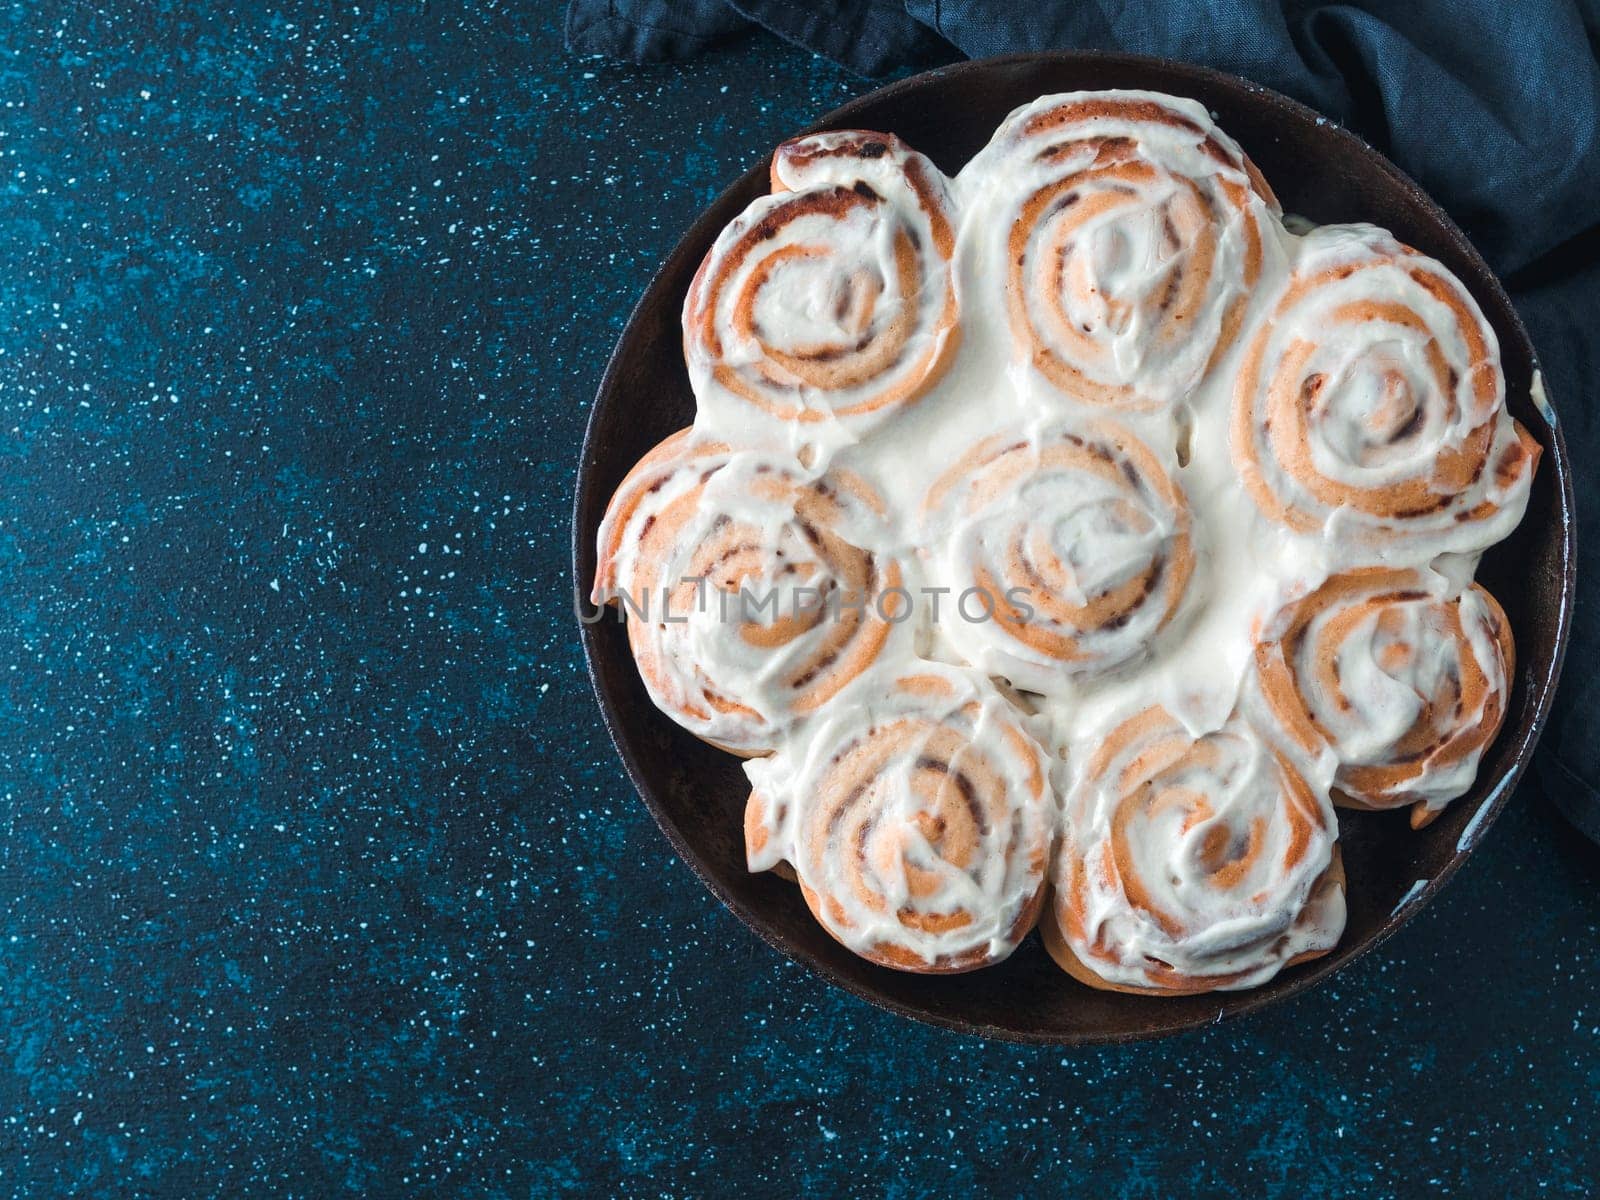 Idea and recipe pastries - perfect cinnamon rolls with topping, top view in skillet. Vegan swedish cinnamon buns Kanelbullar with pumpkin spice,topping vegan cream cheese.Flat lay. Copy space for text